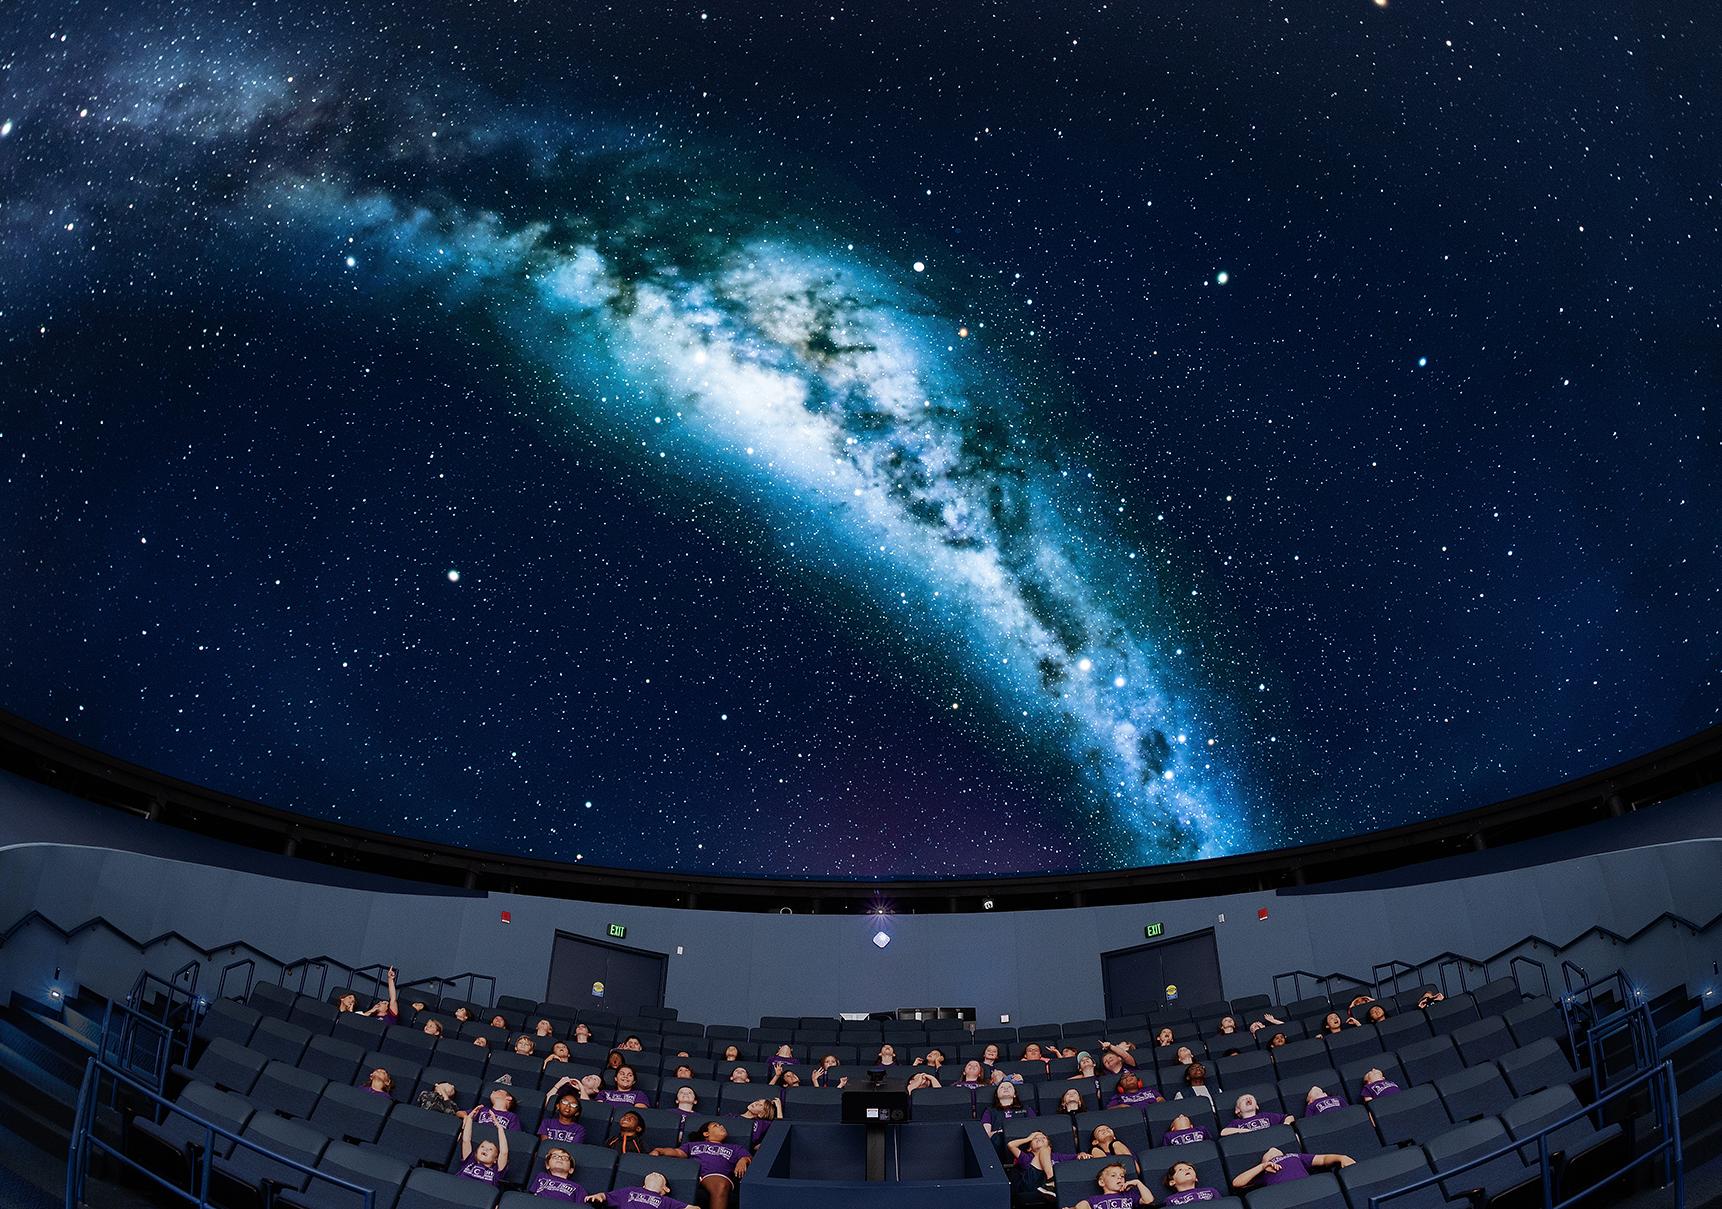 Group of school children sit under the planetarium dome which projects an image of the milky way